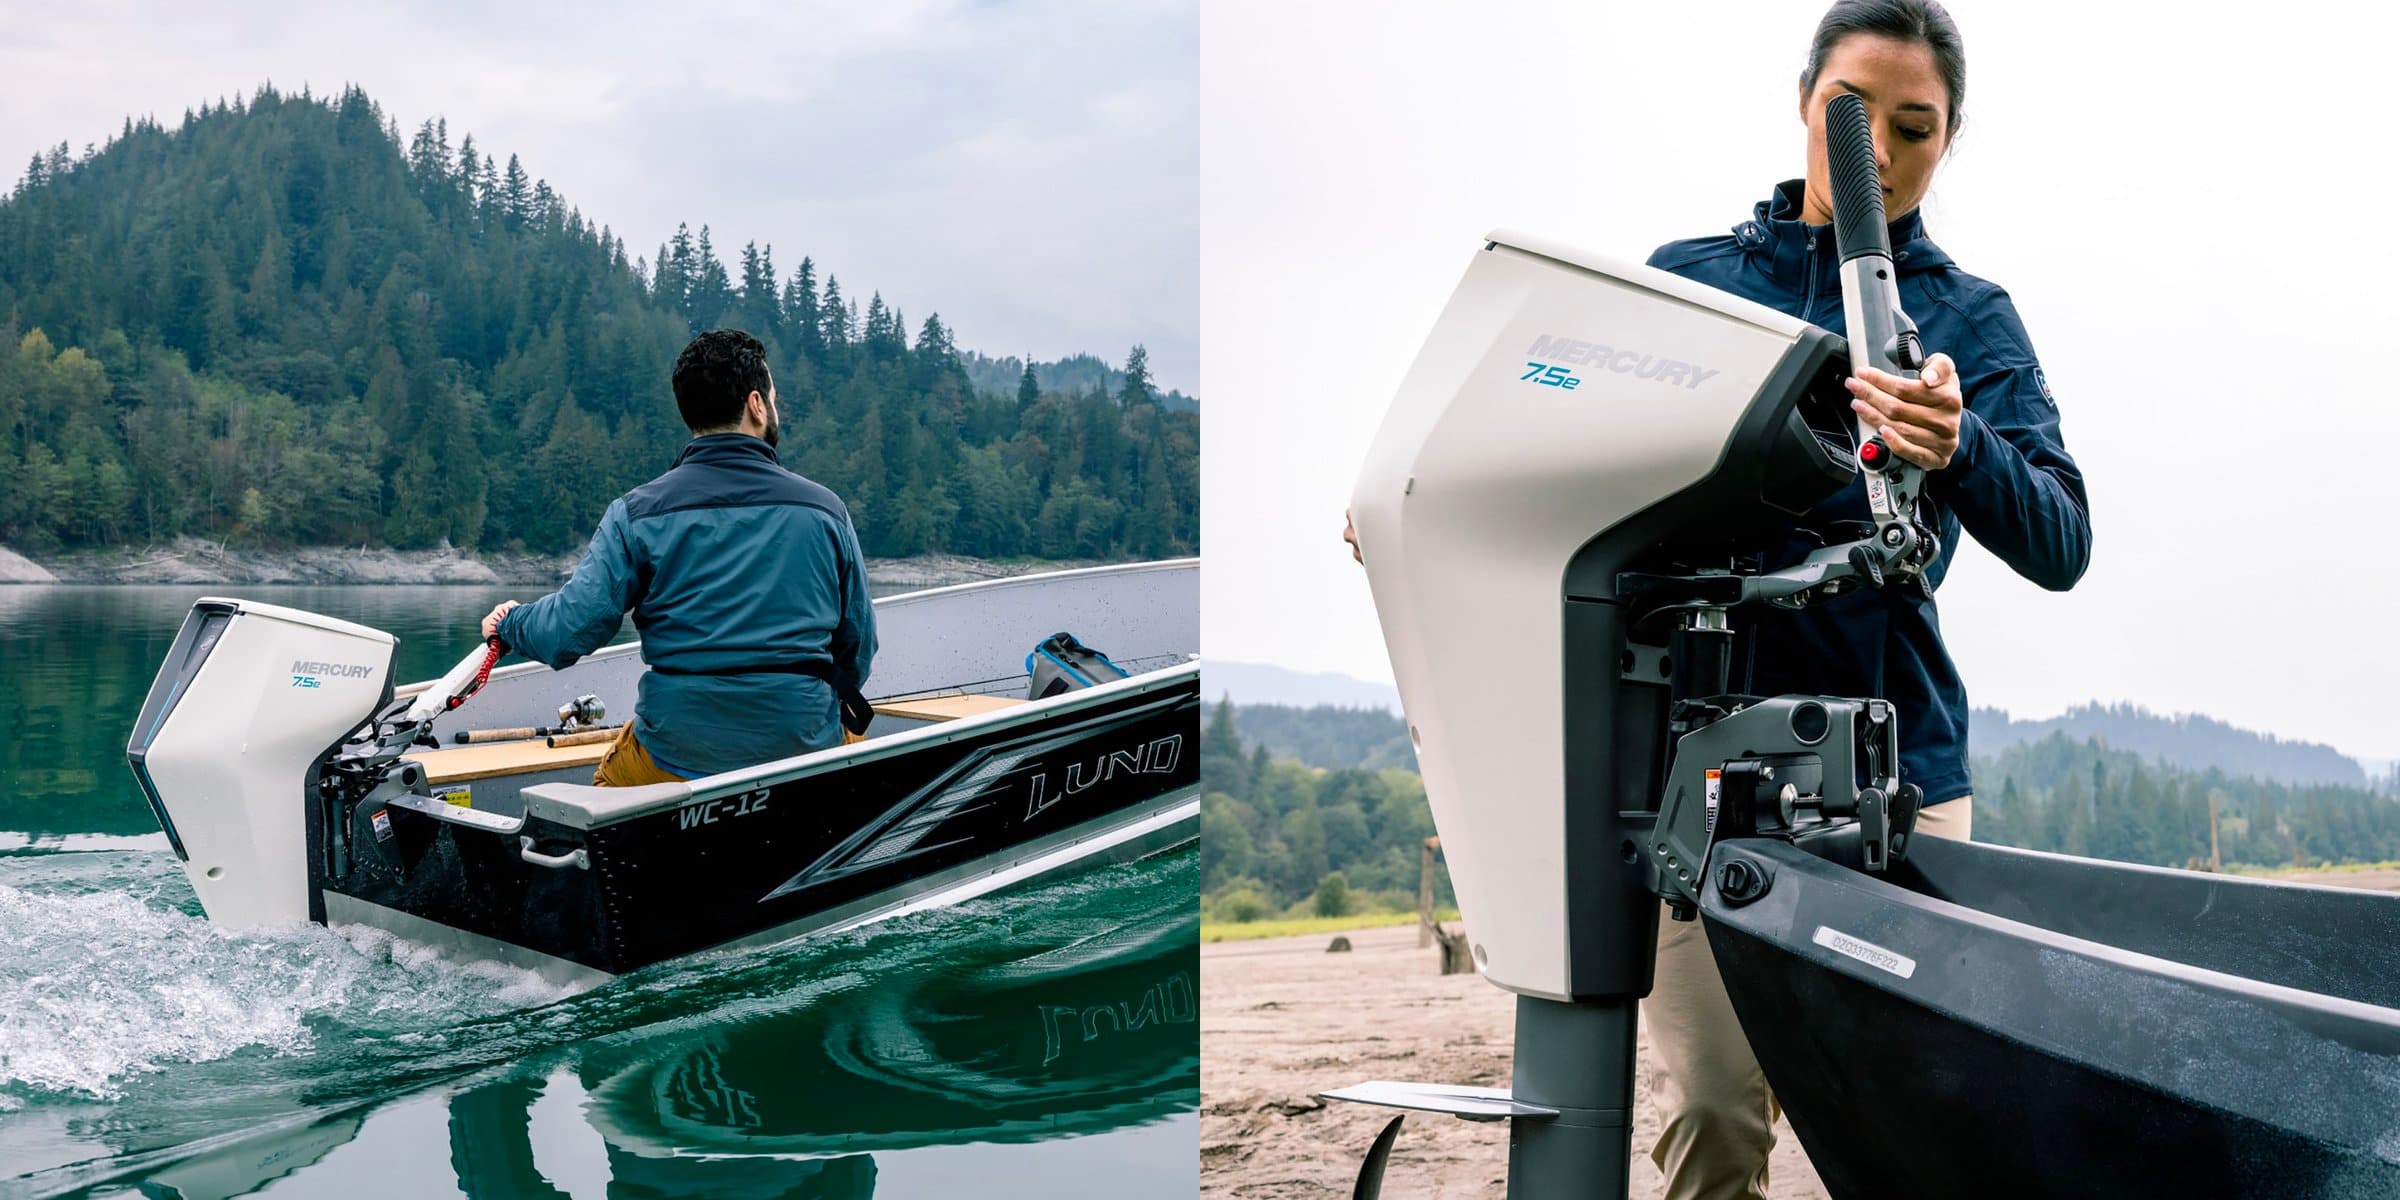 Mercury's electric outboard motor tests reveal higher performance